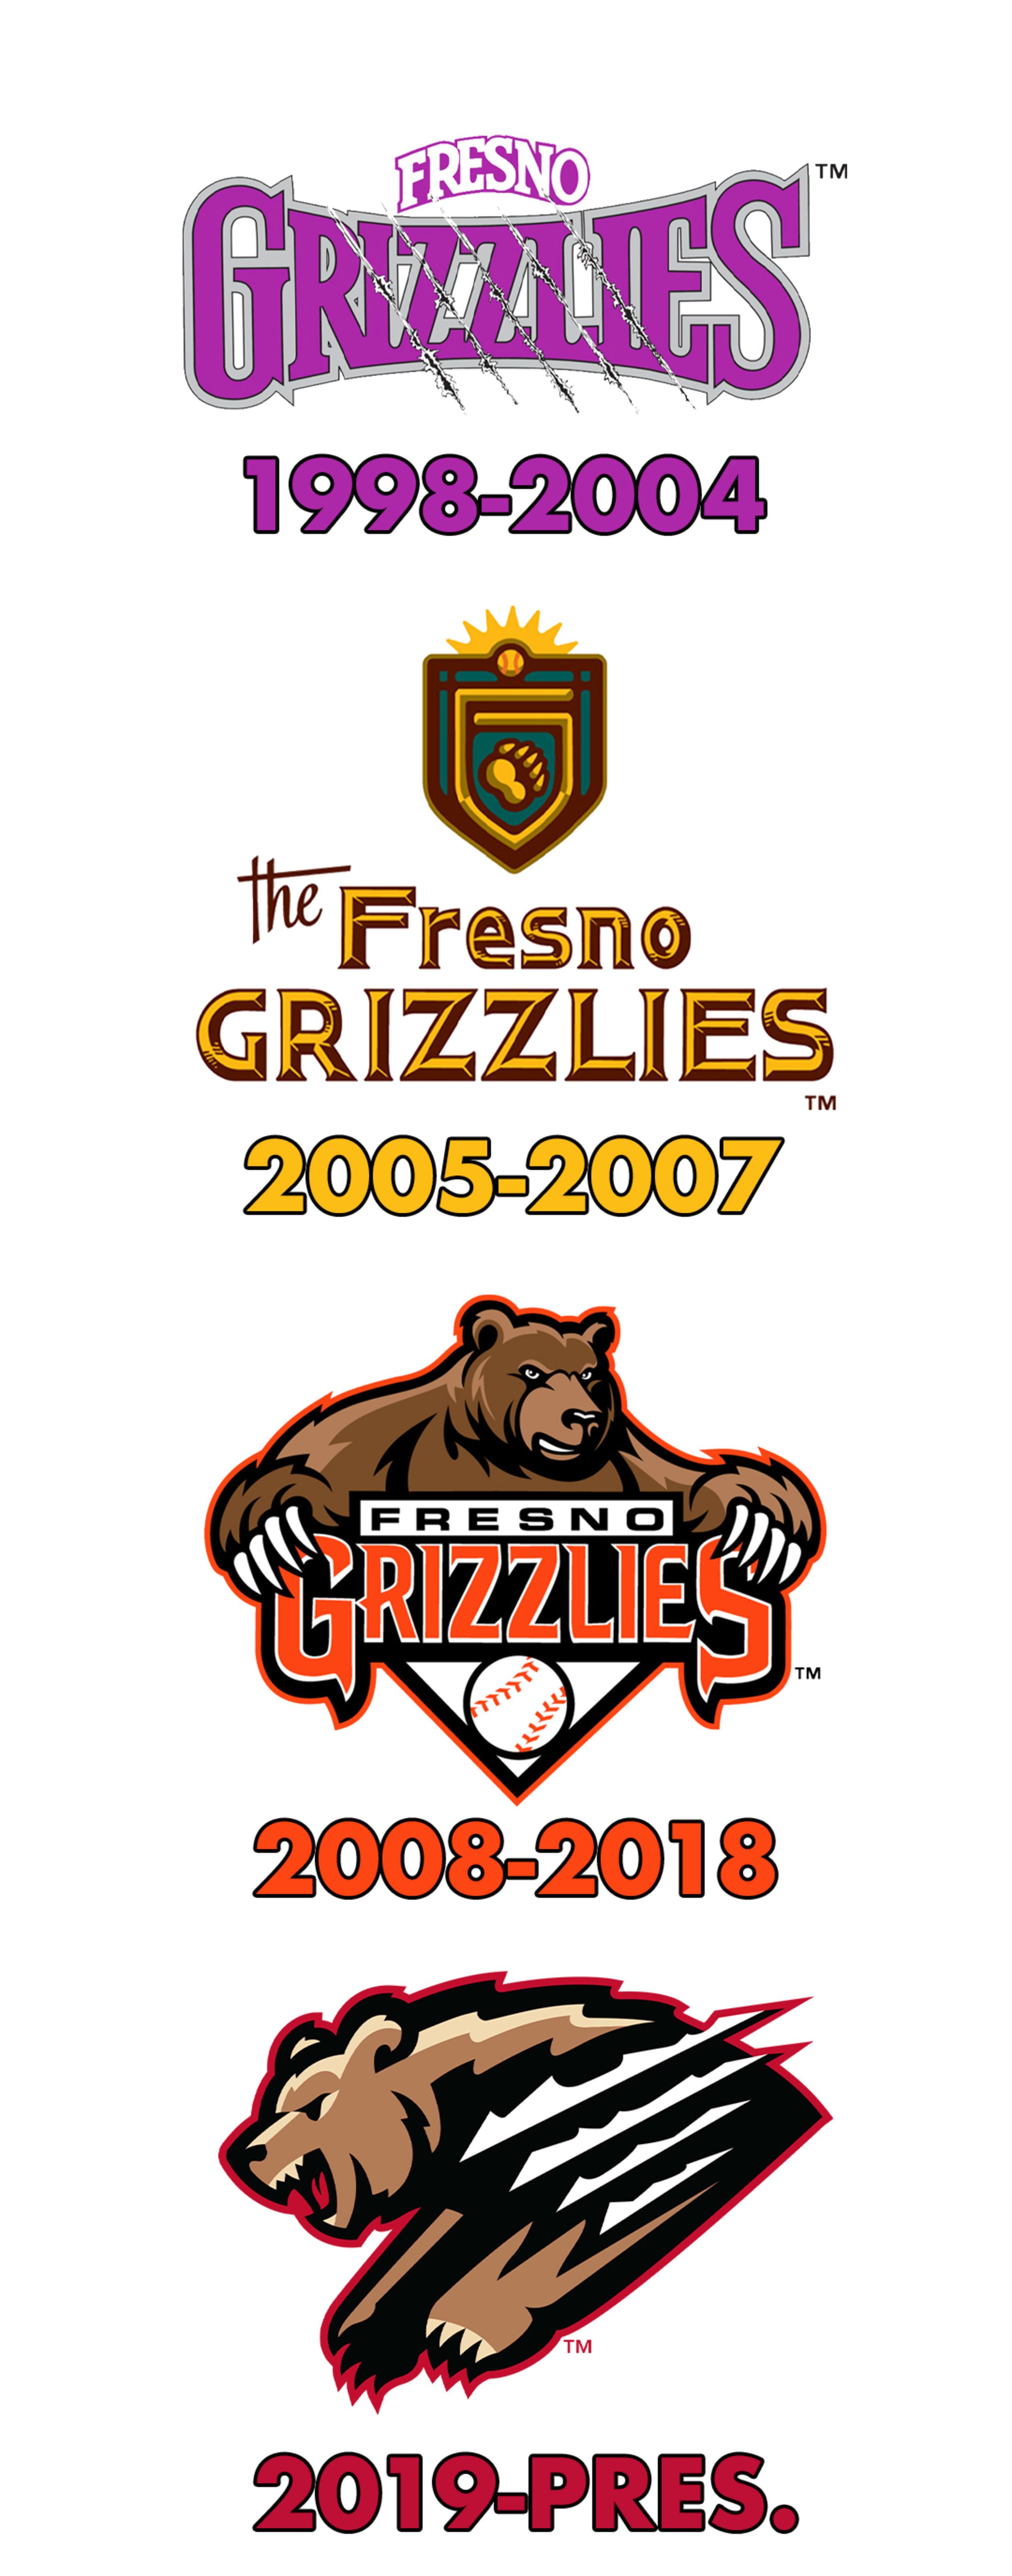 About The Fresno Grizzlies Grizzlies